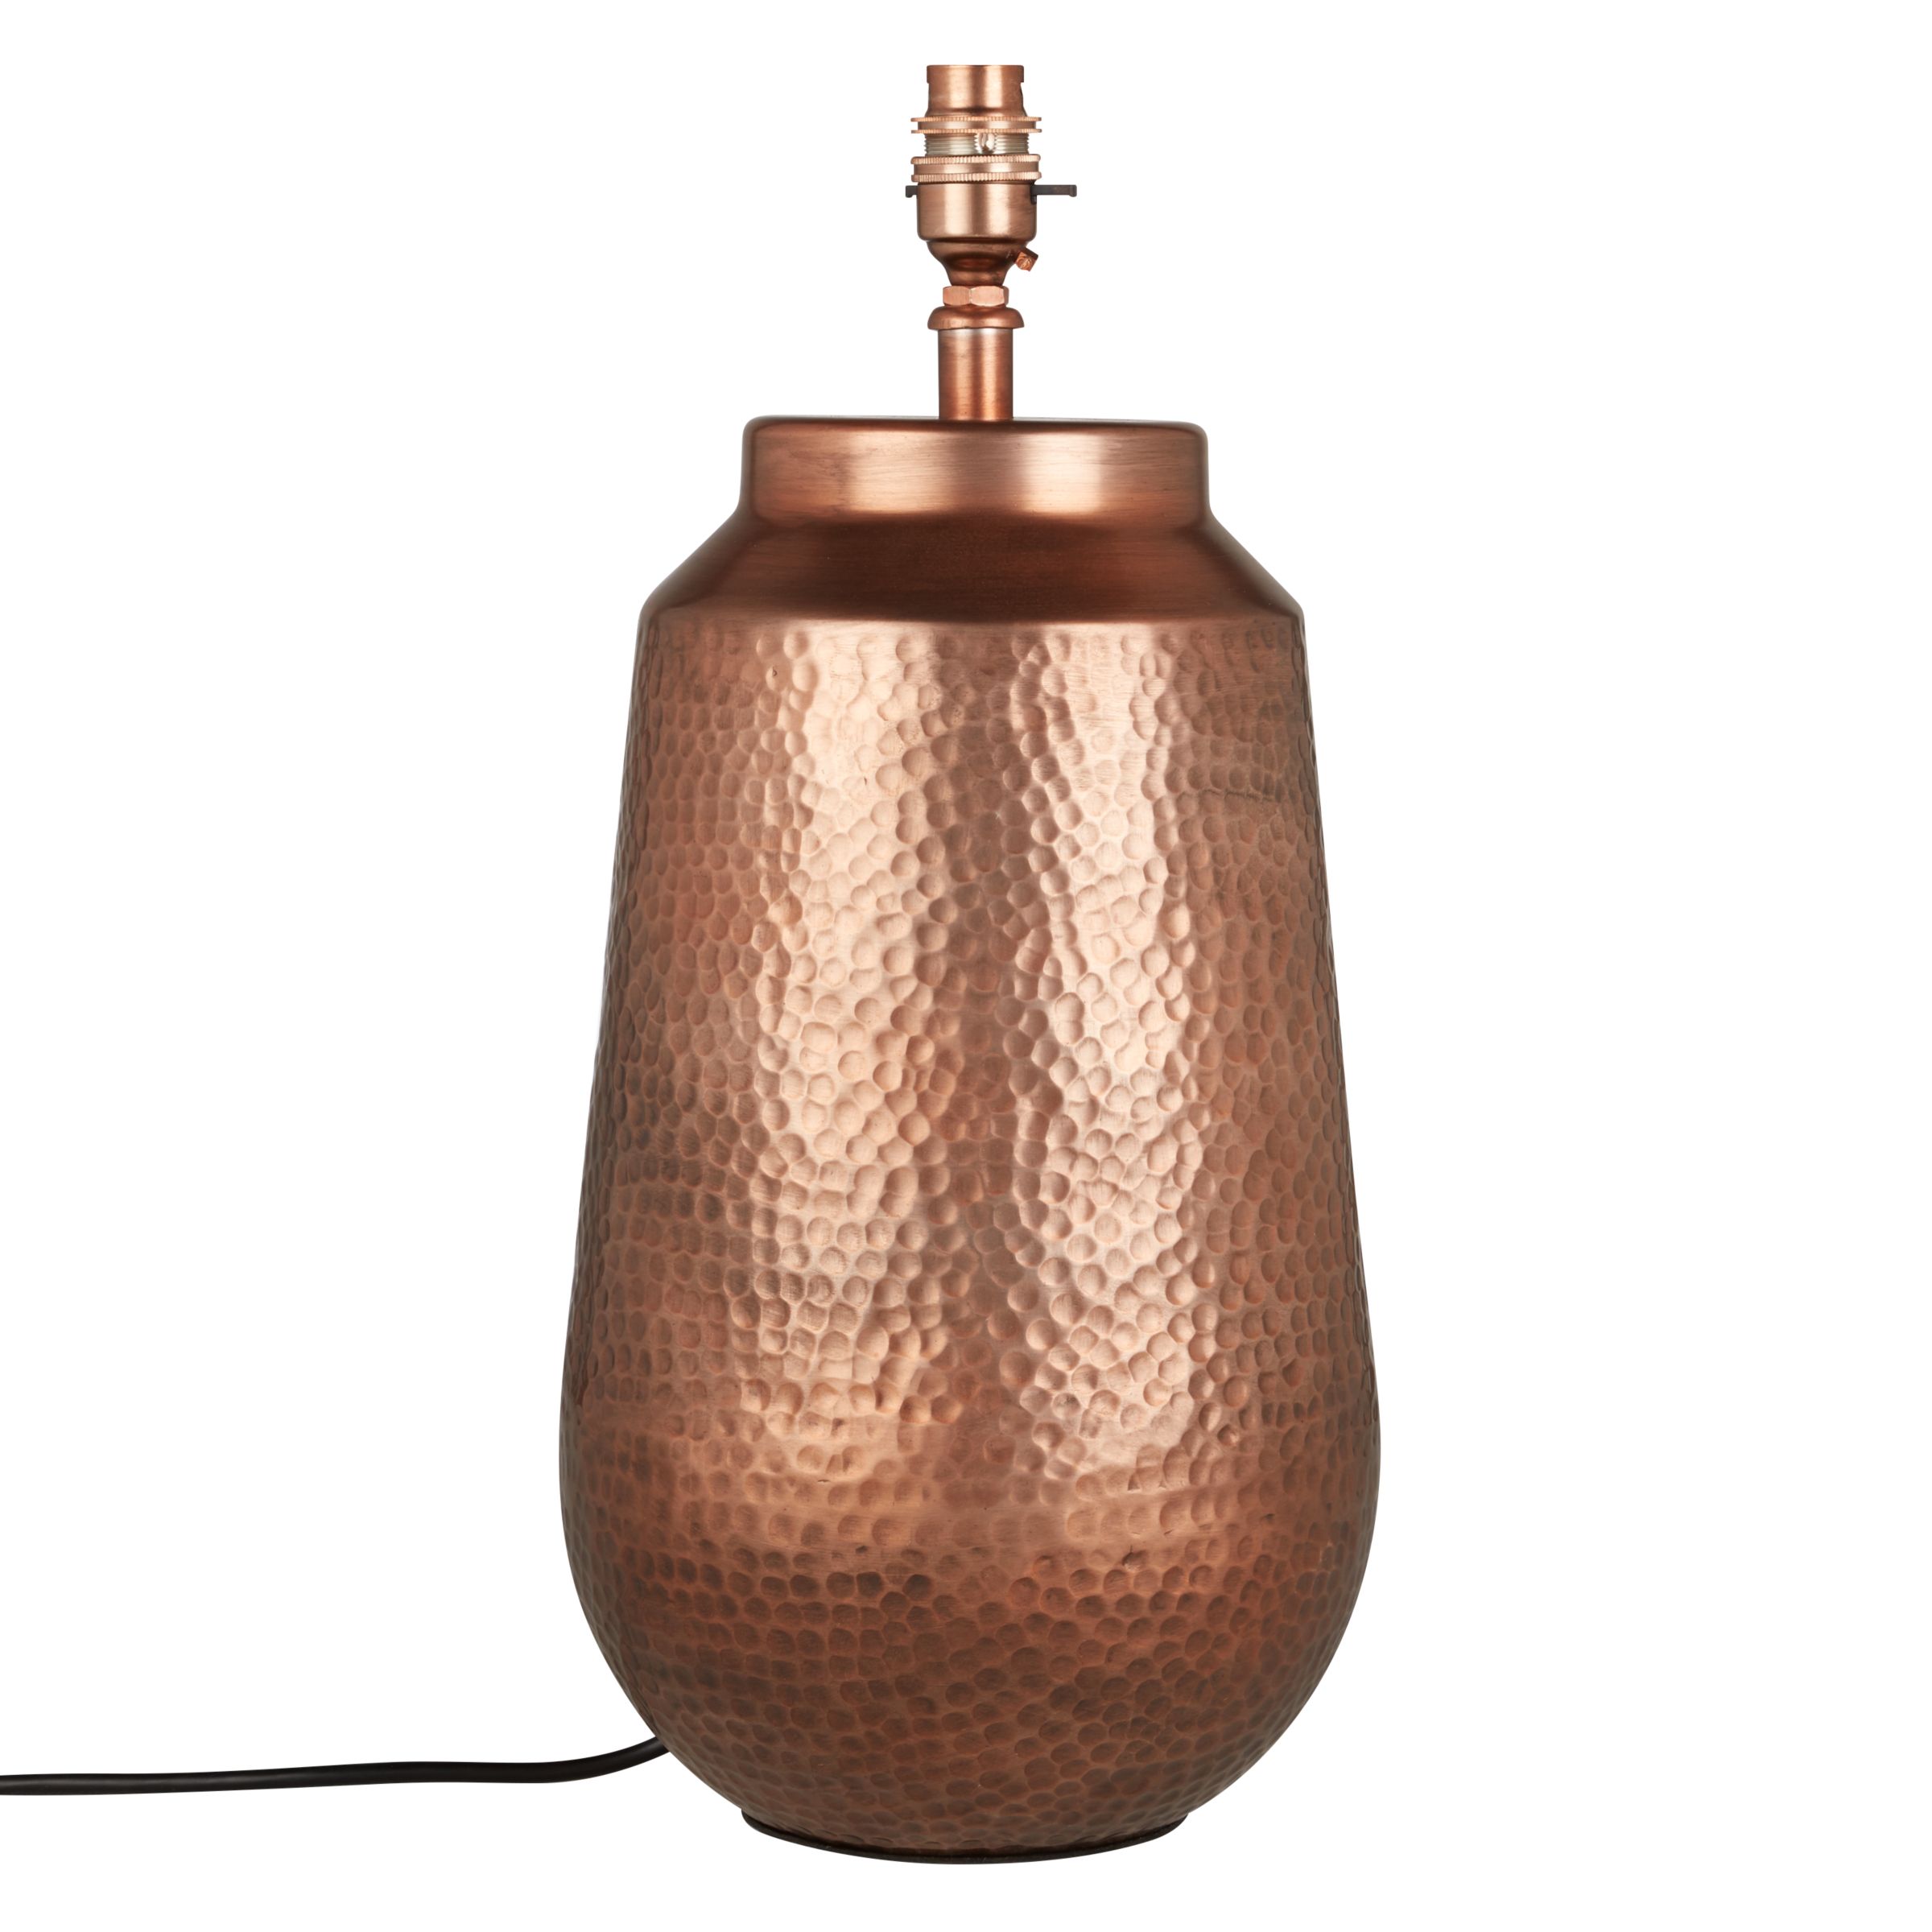 John Lewis Partners Rohan Hammered, Hammered Antique Copper Table Lamp